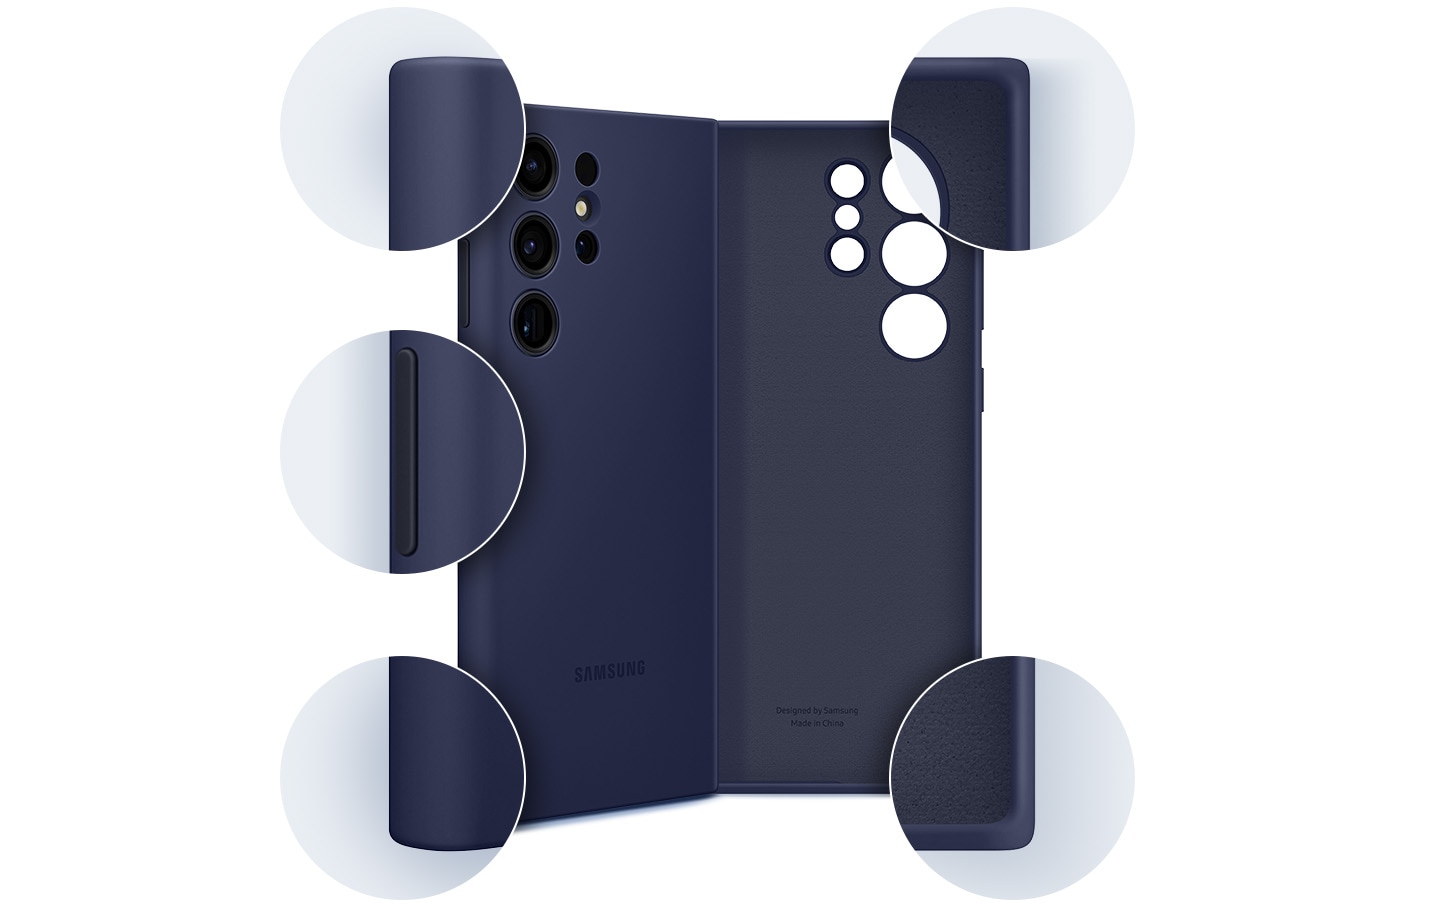 The front and back side of the Silicone case are shown with detailed zoom-in of the edges shown around them.